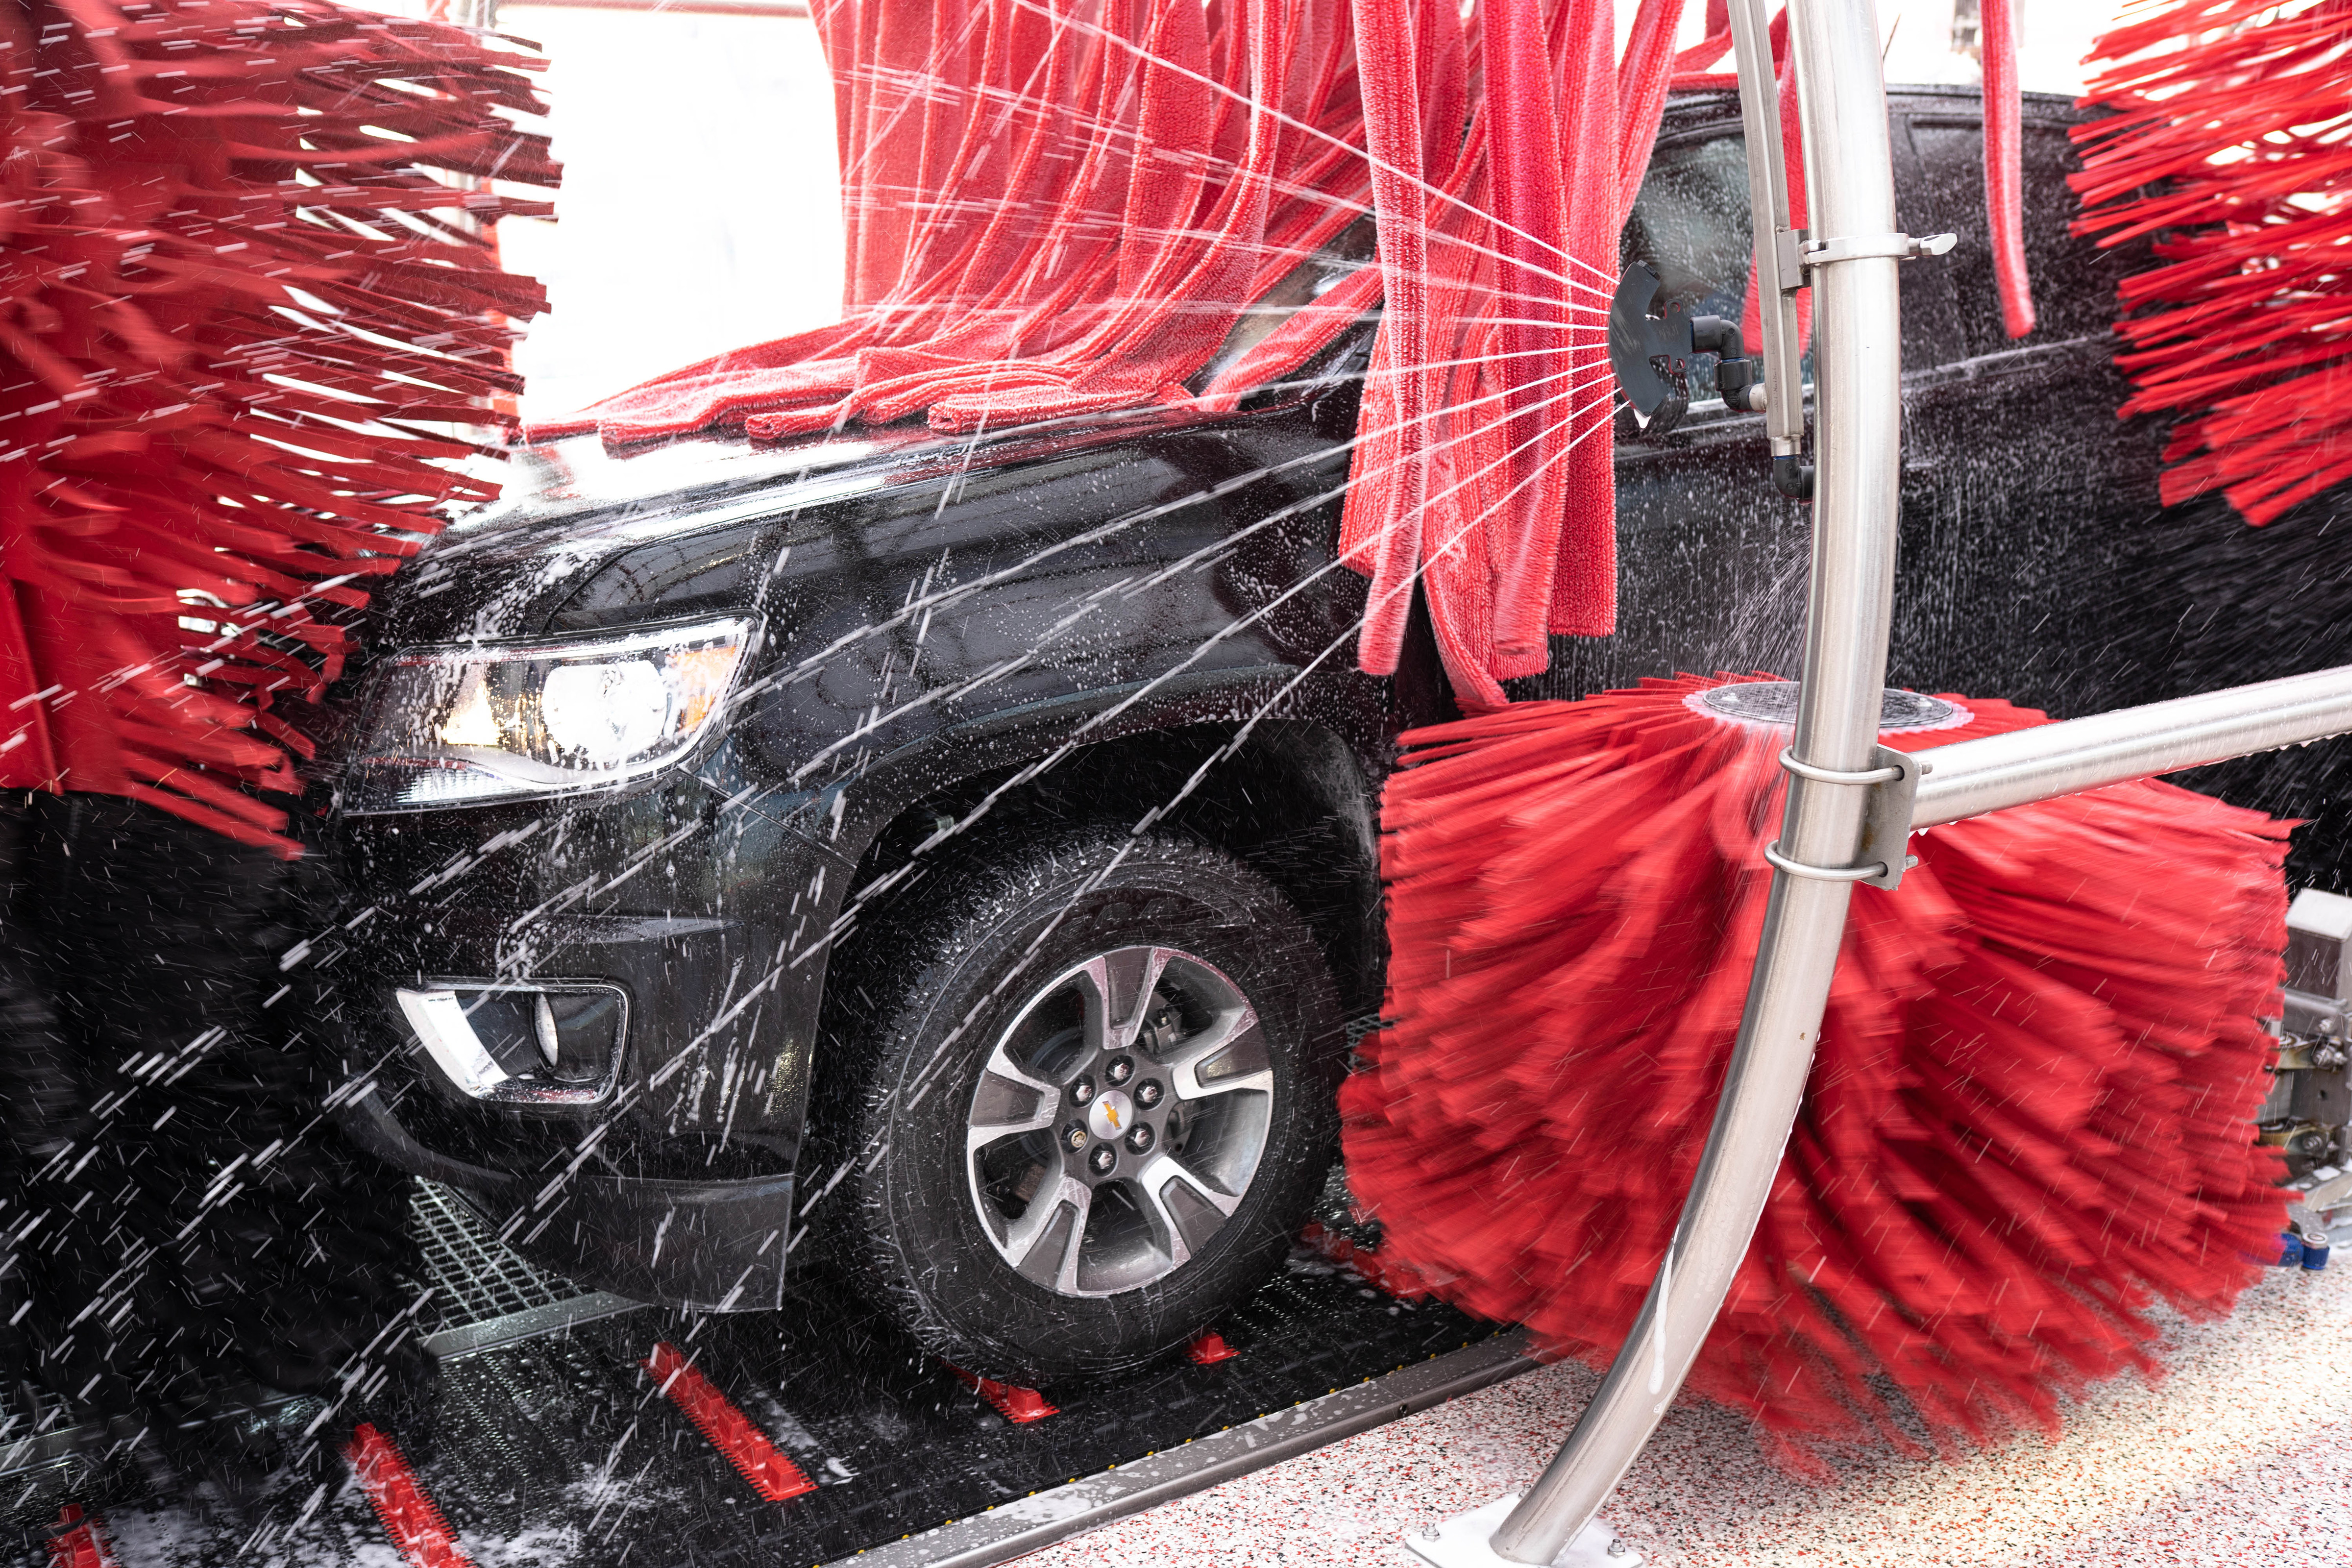 Tommy's Express® Car Wash Photo